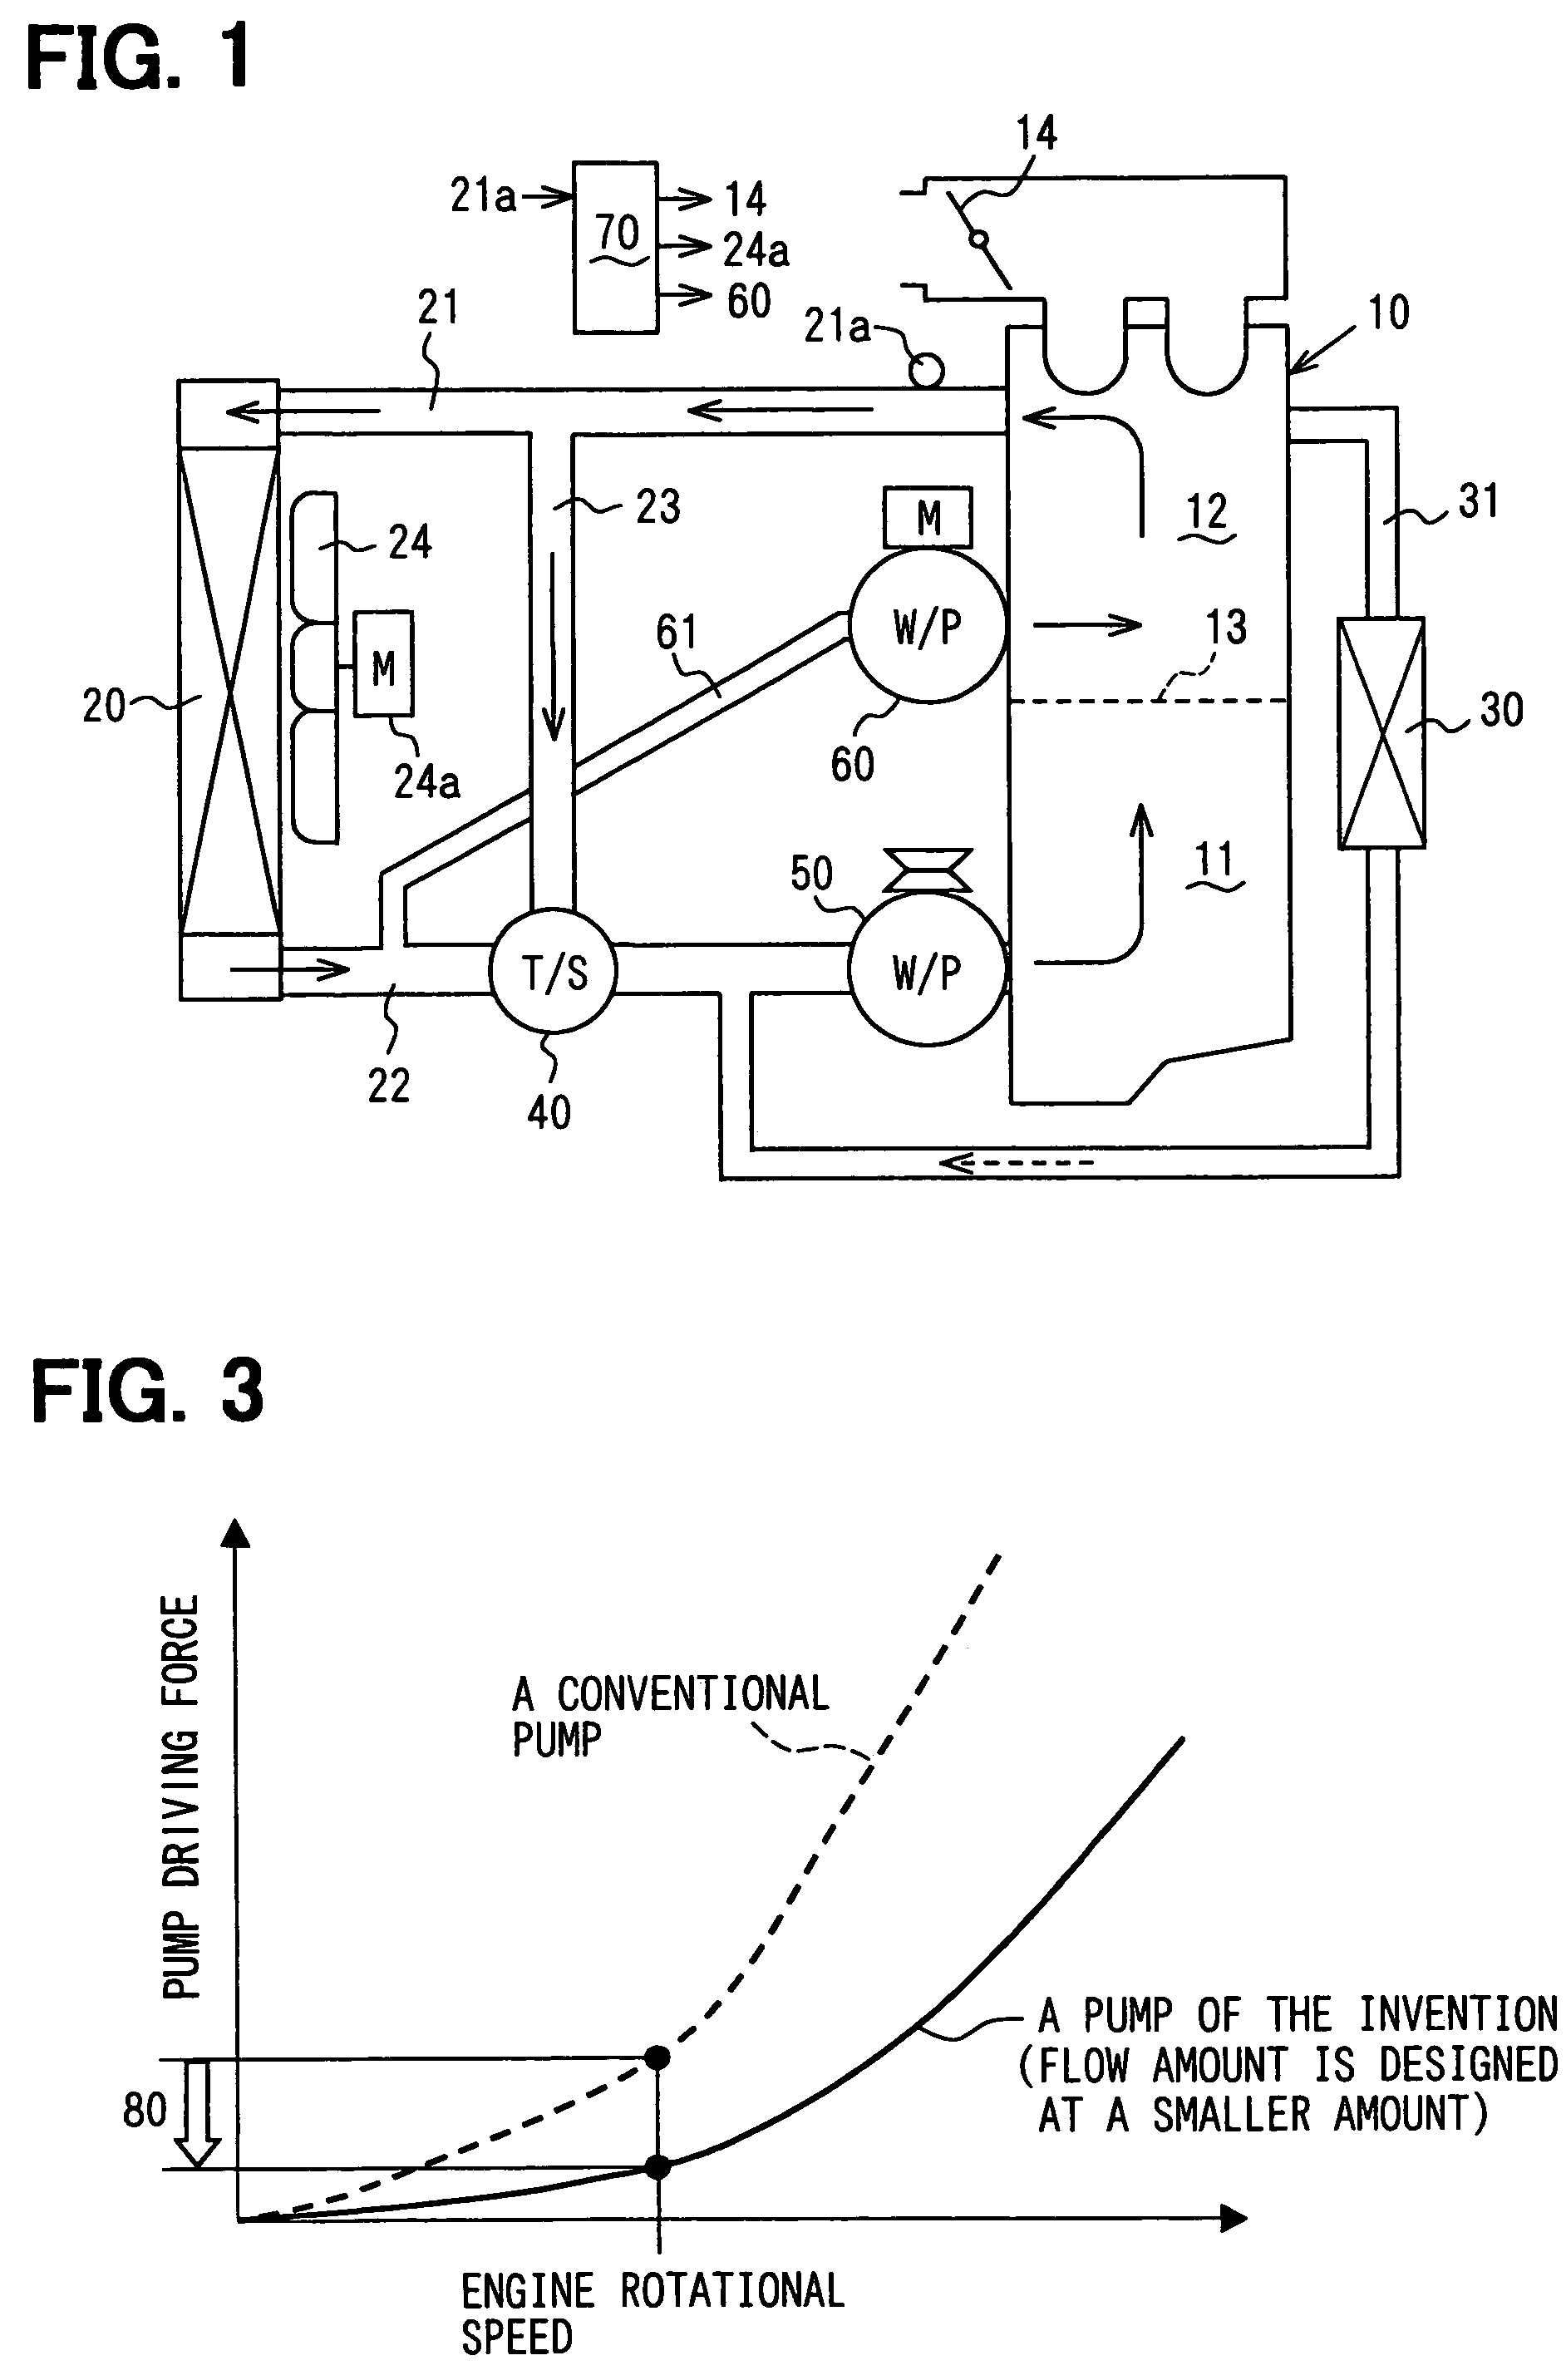 Liquid-cooling device for internal combustion engine